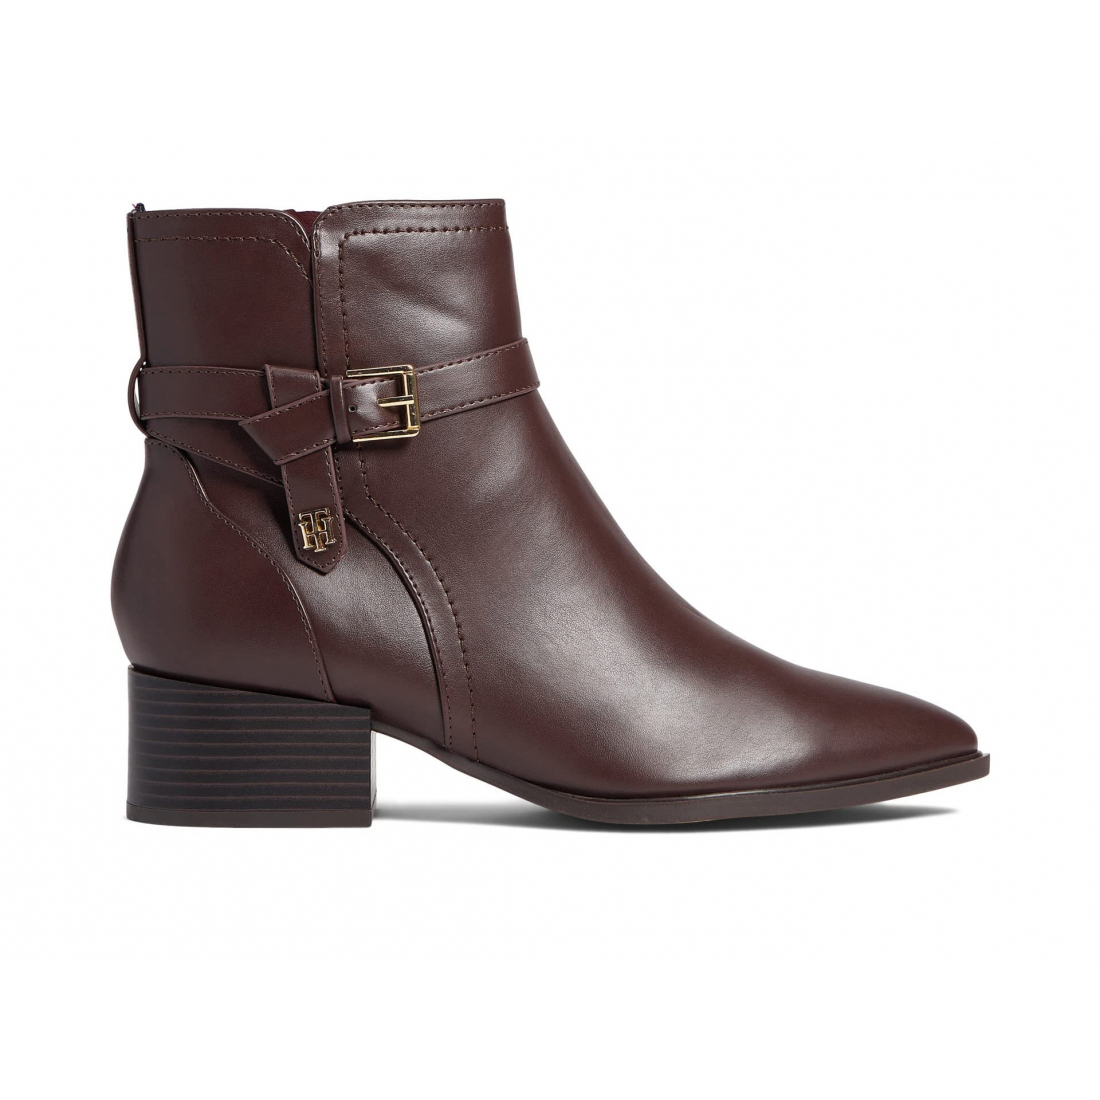 Women's 'Jimina' Ankle Boots